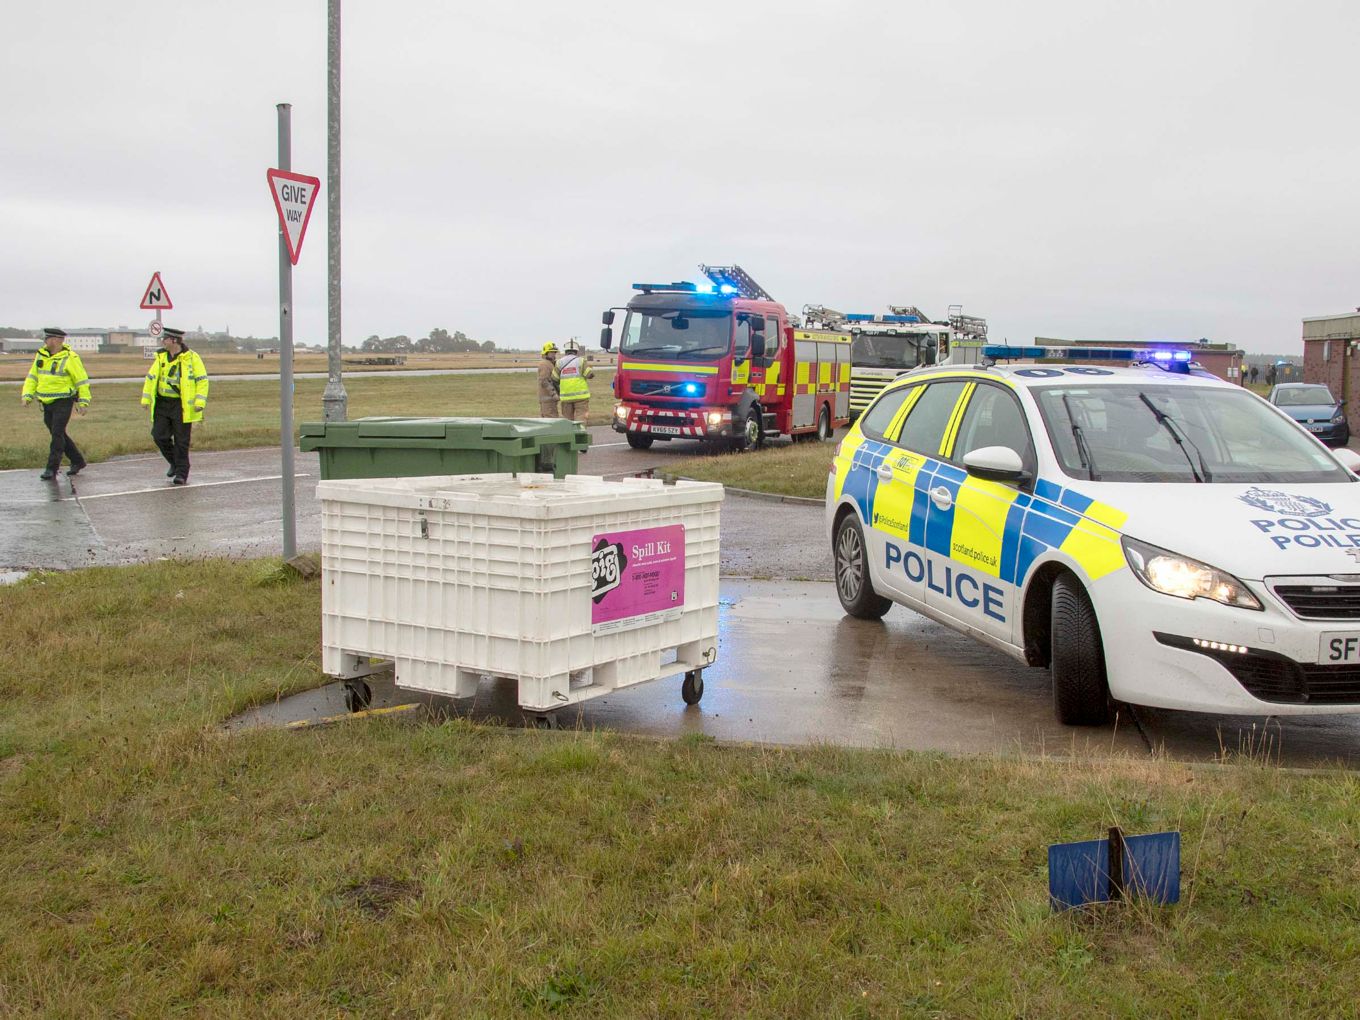 Emergency services personnel and vehicles taking part in an exercise at RAF Lossiemouth